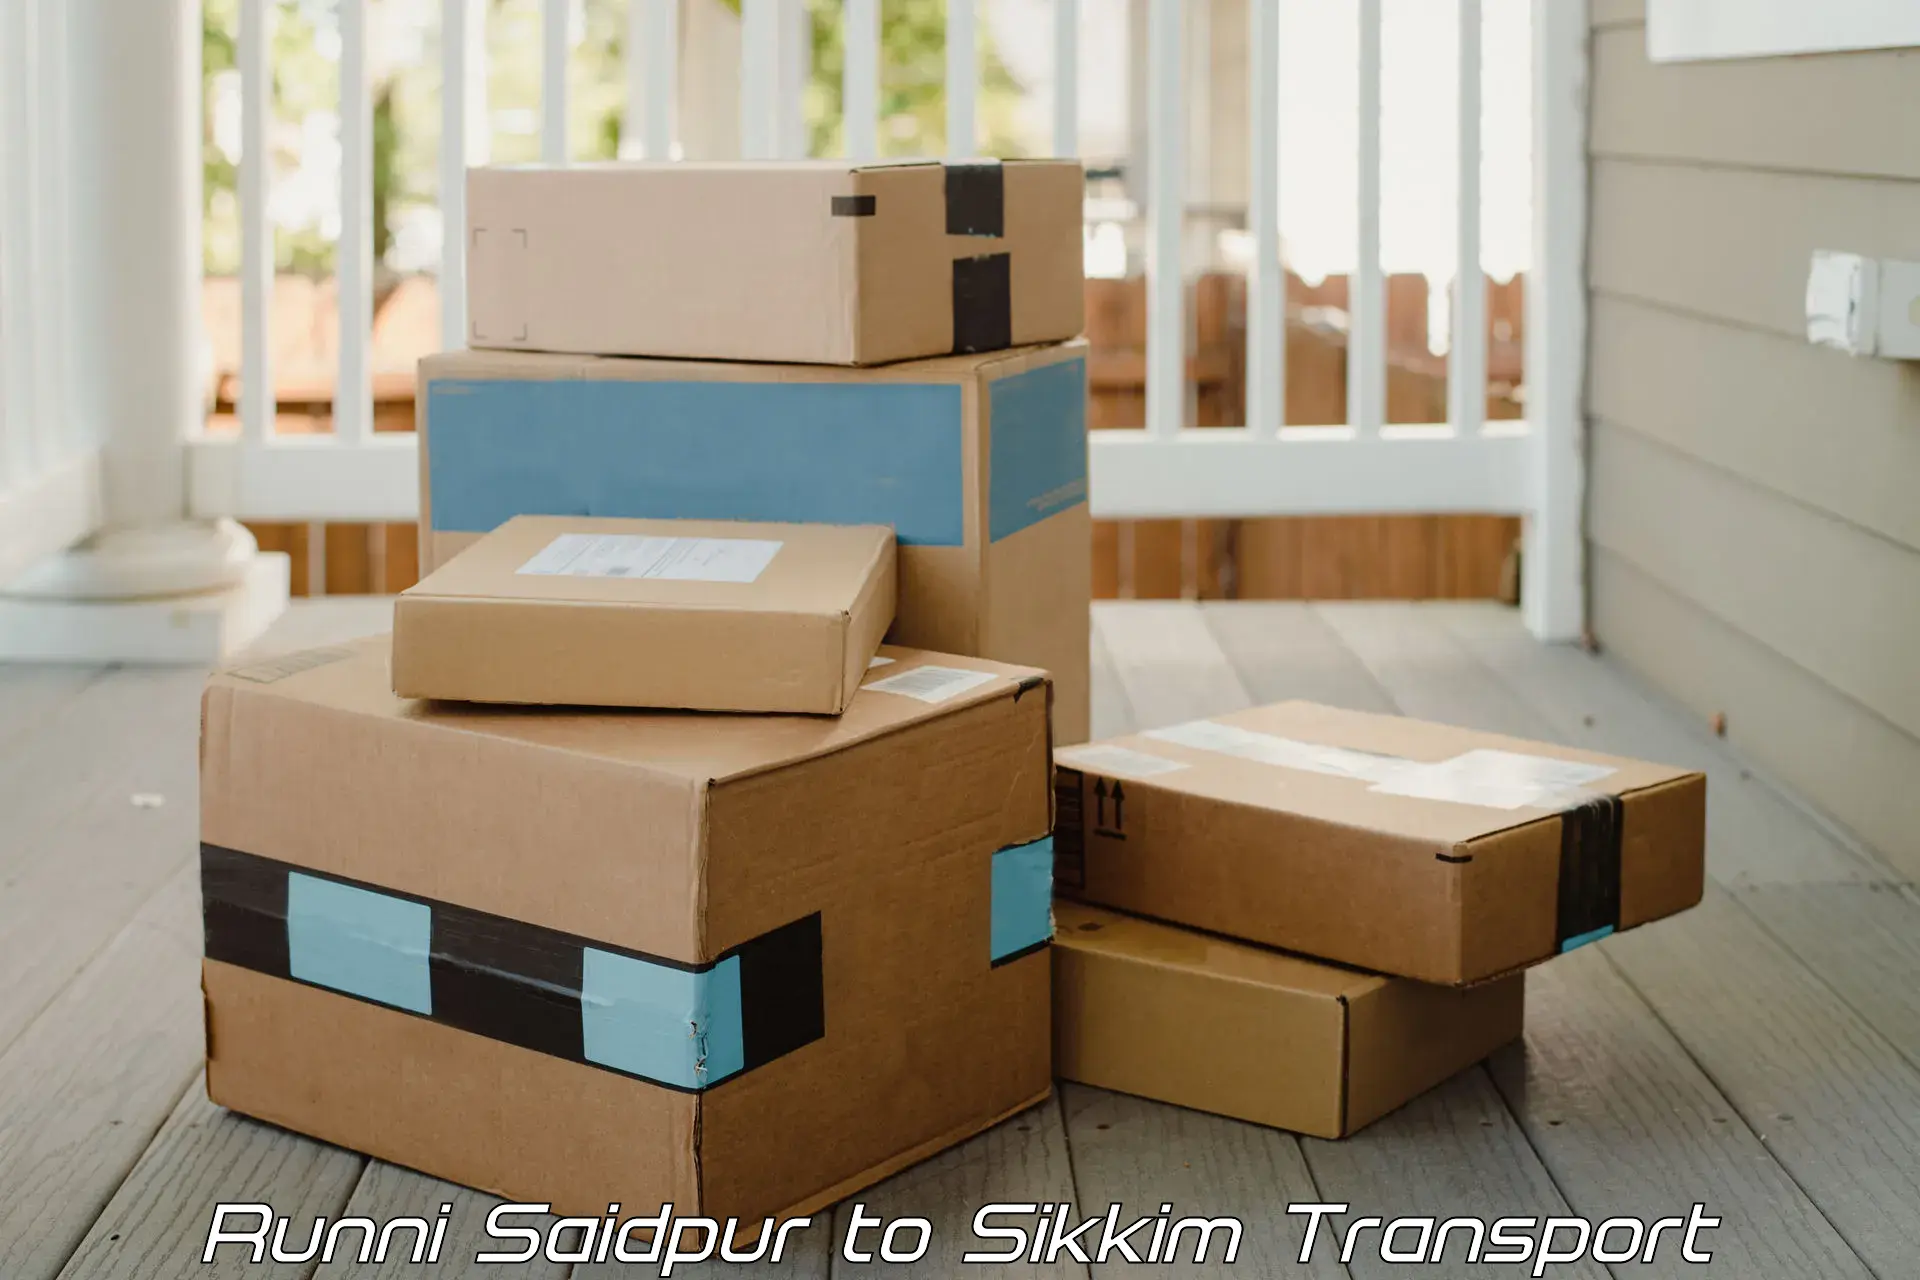 Vehicle parcel service Runni Saidpur to South Sikkim